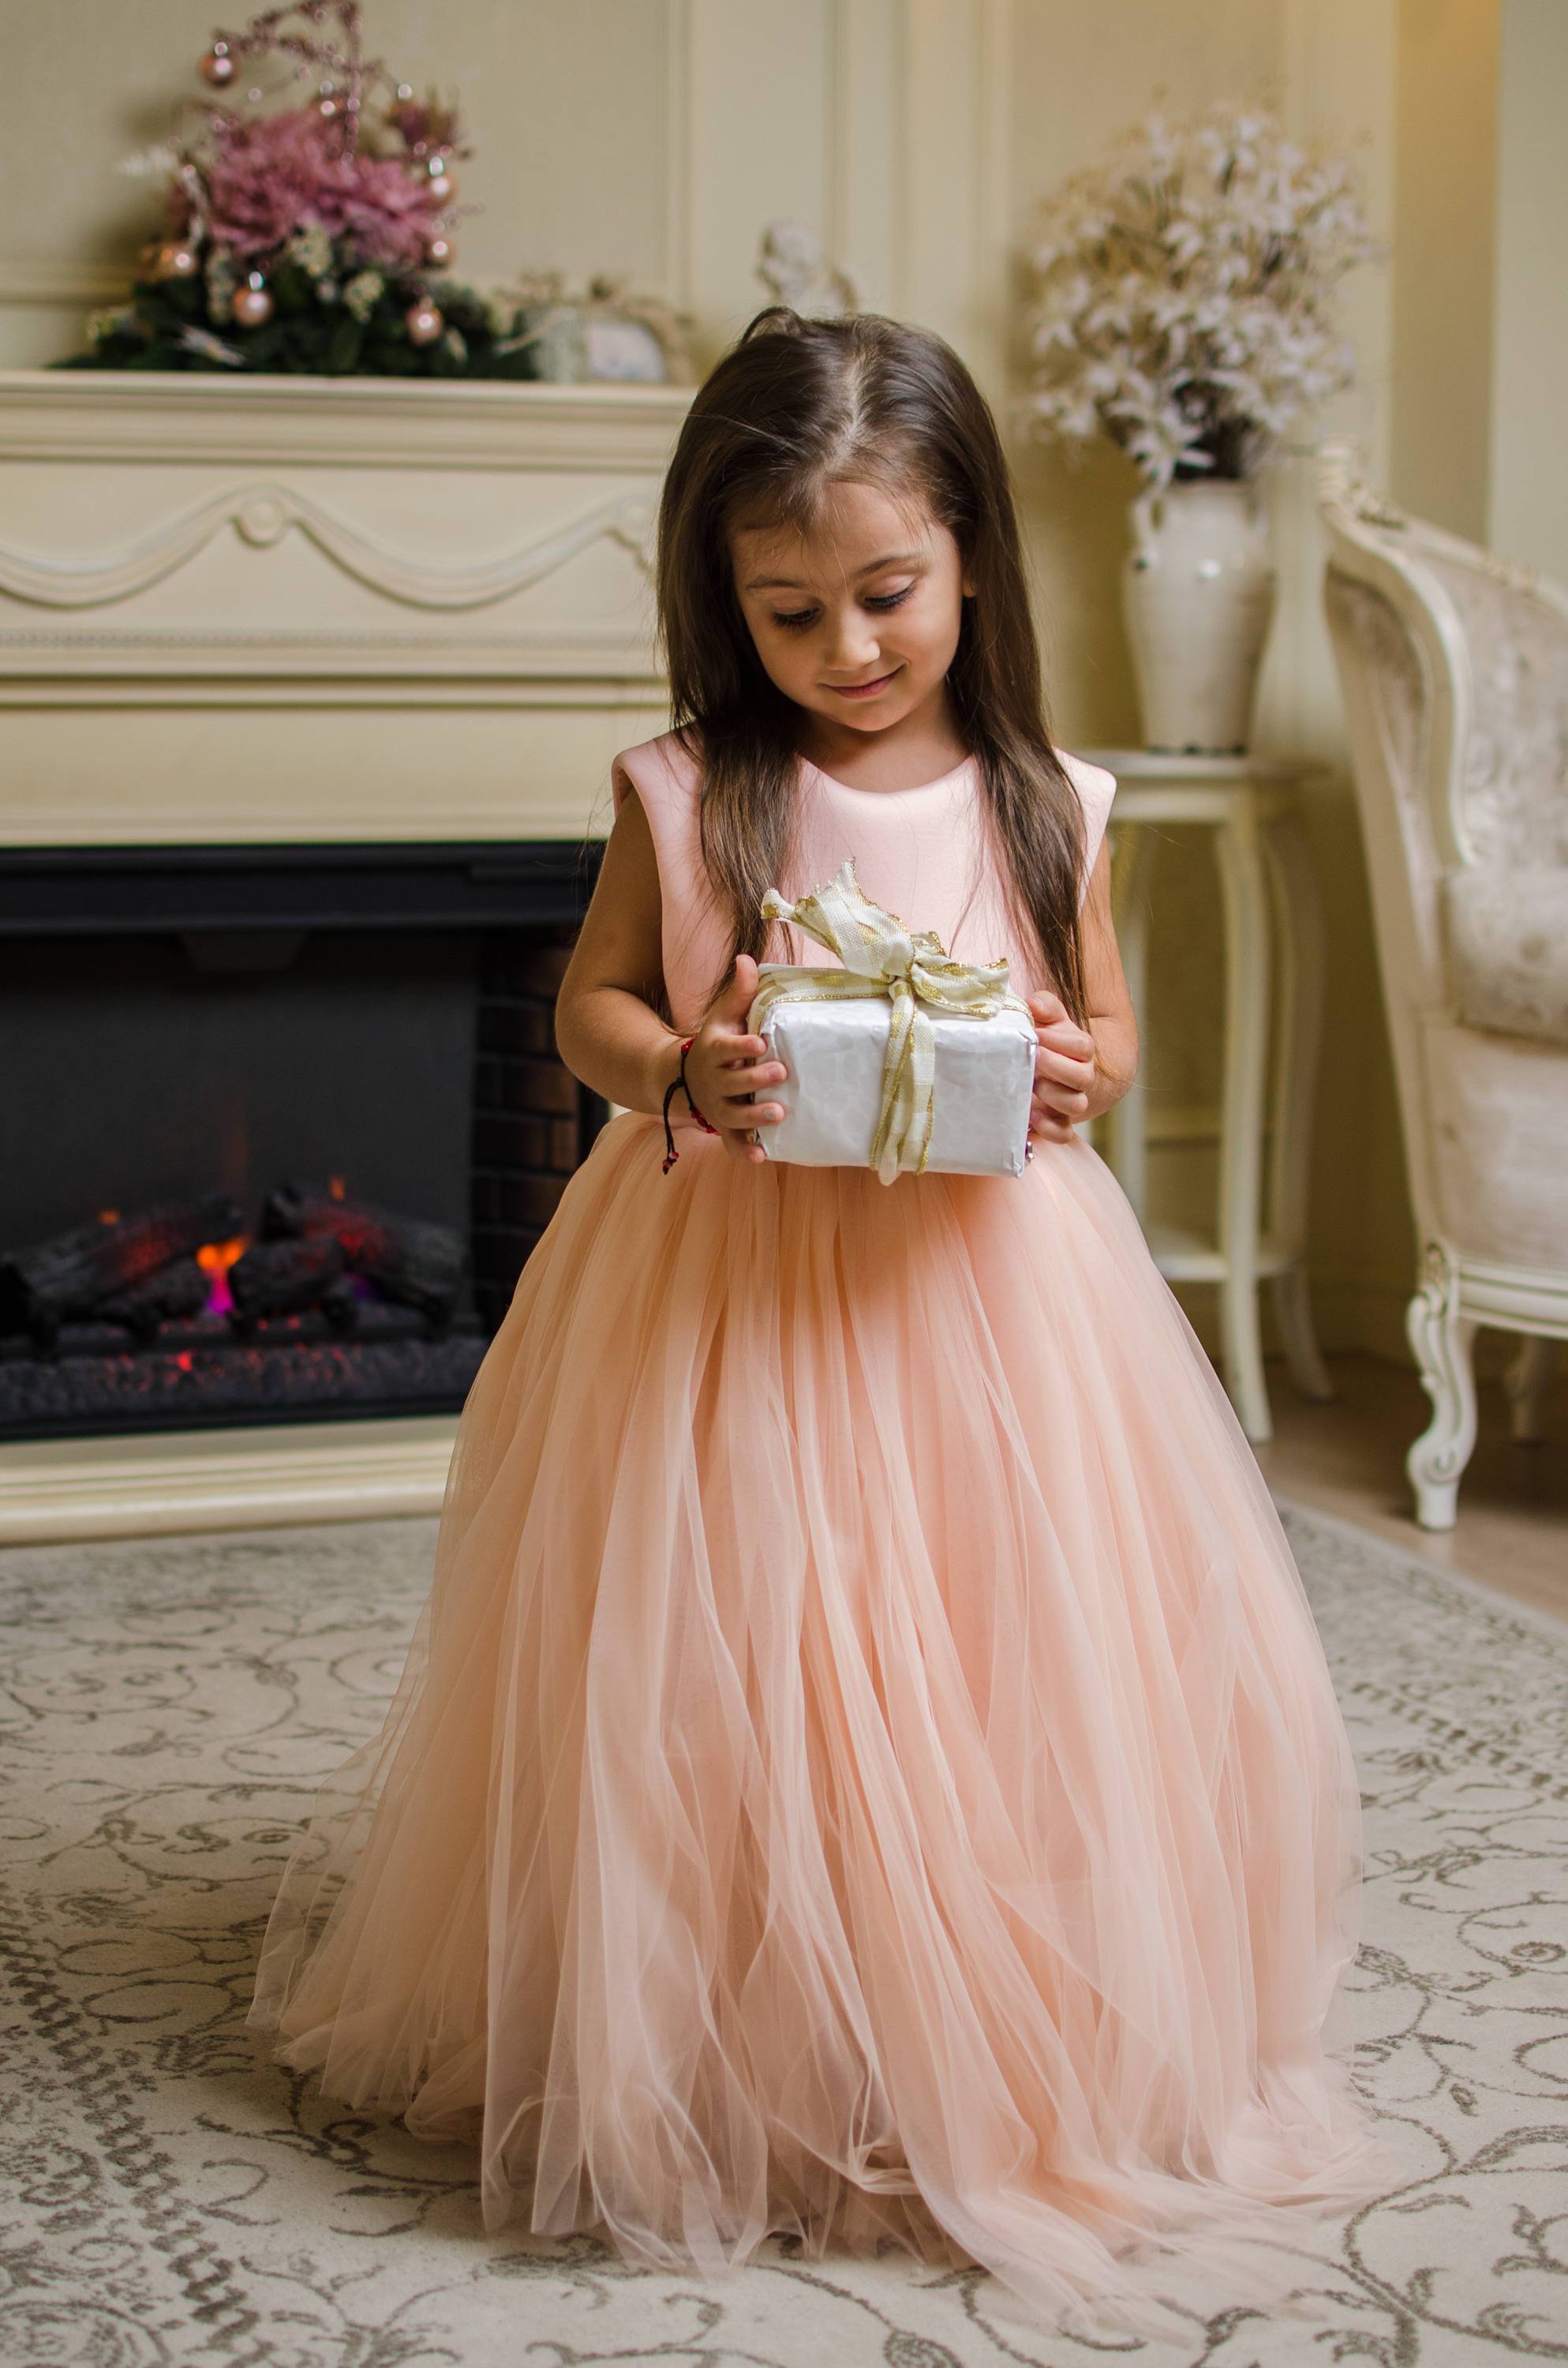 princess dresses for toddlers